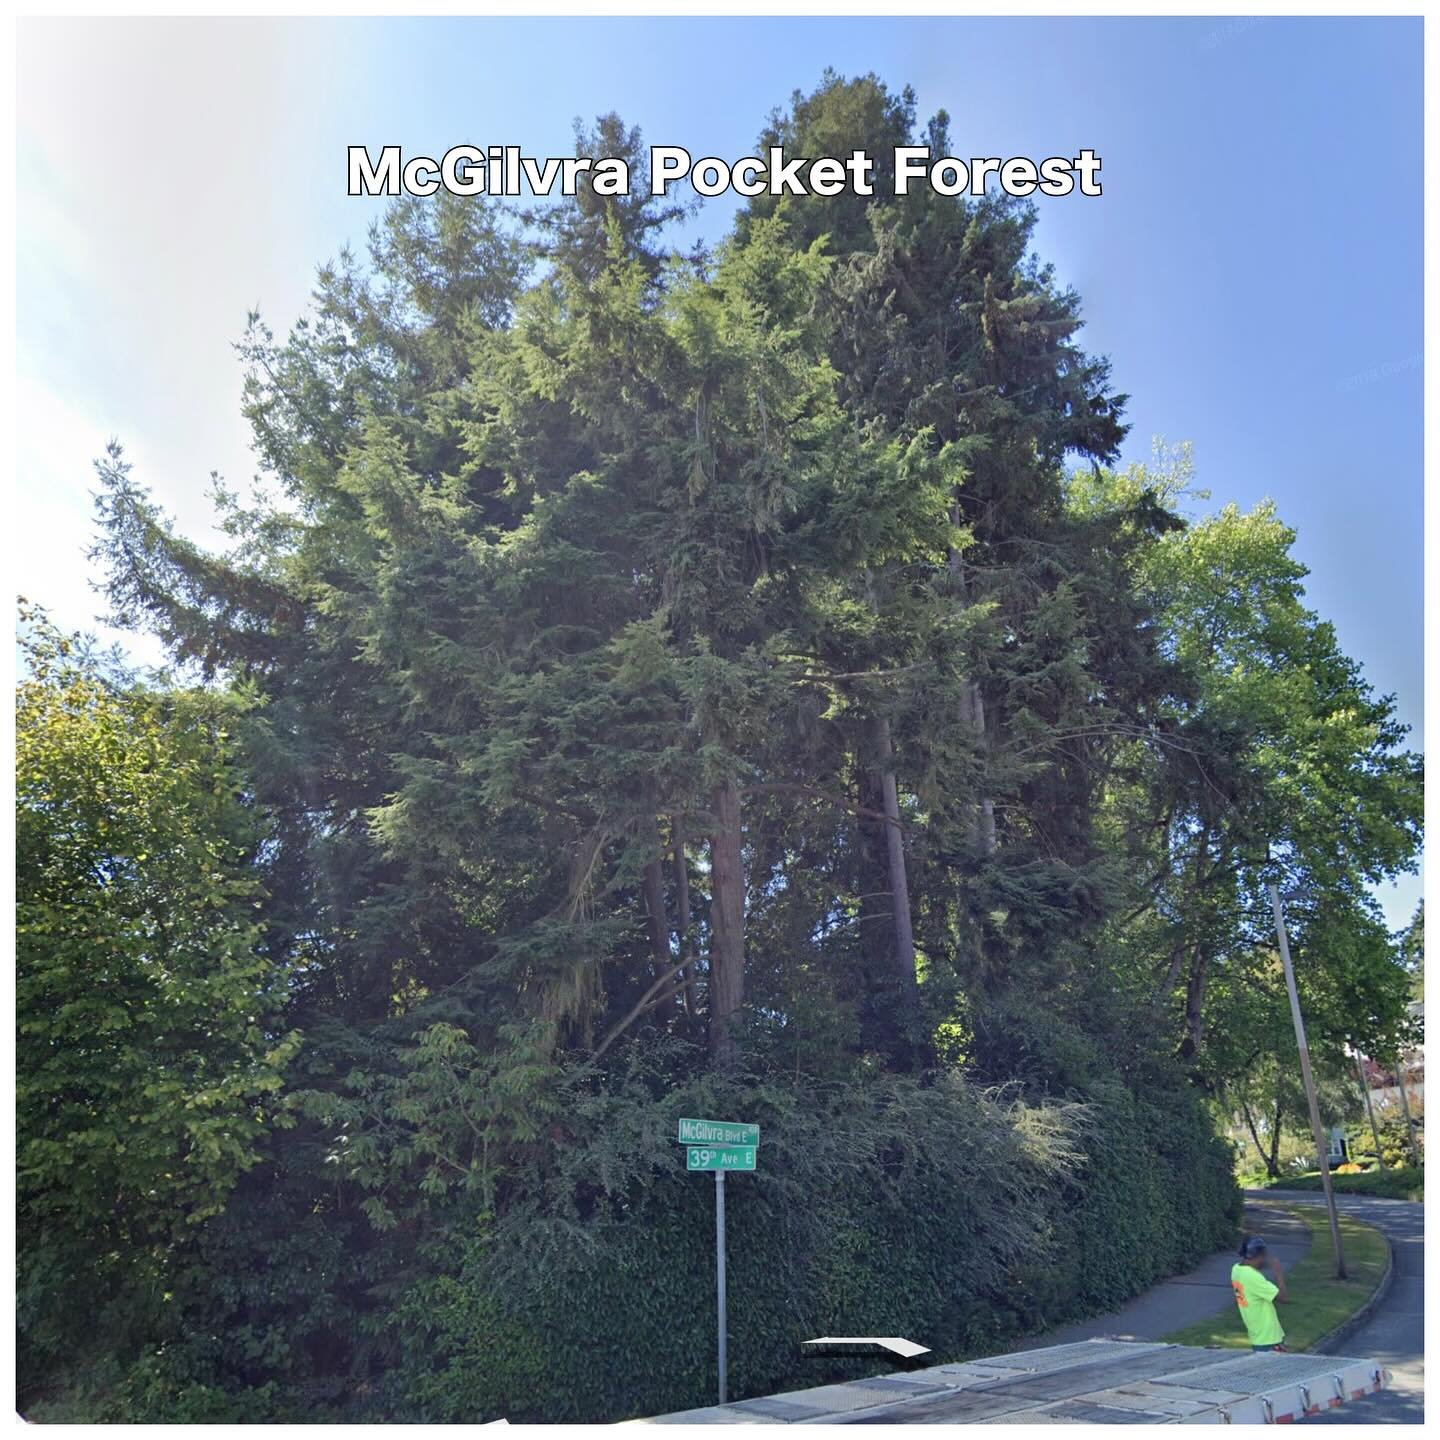 SAVE THE McGILVRA POCKET FOREST

The City of Seattle classifies the mature tree grove at  700 McGilvra Boulevard East, as a Steep Slope Erosion Hazard Area, which is a specific type of Environmentally Critical Area (ECA), defined as any slope with an